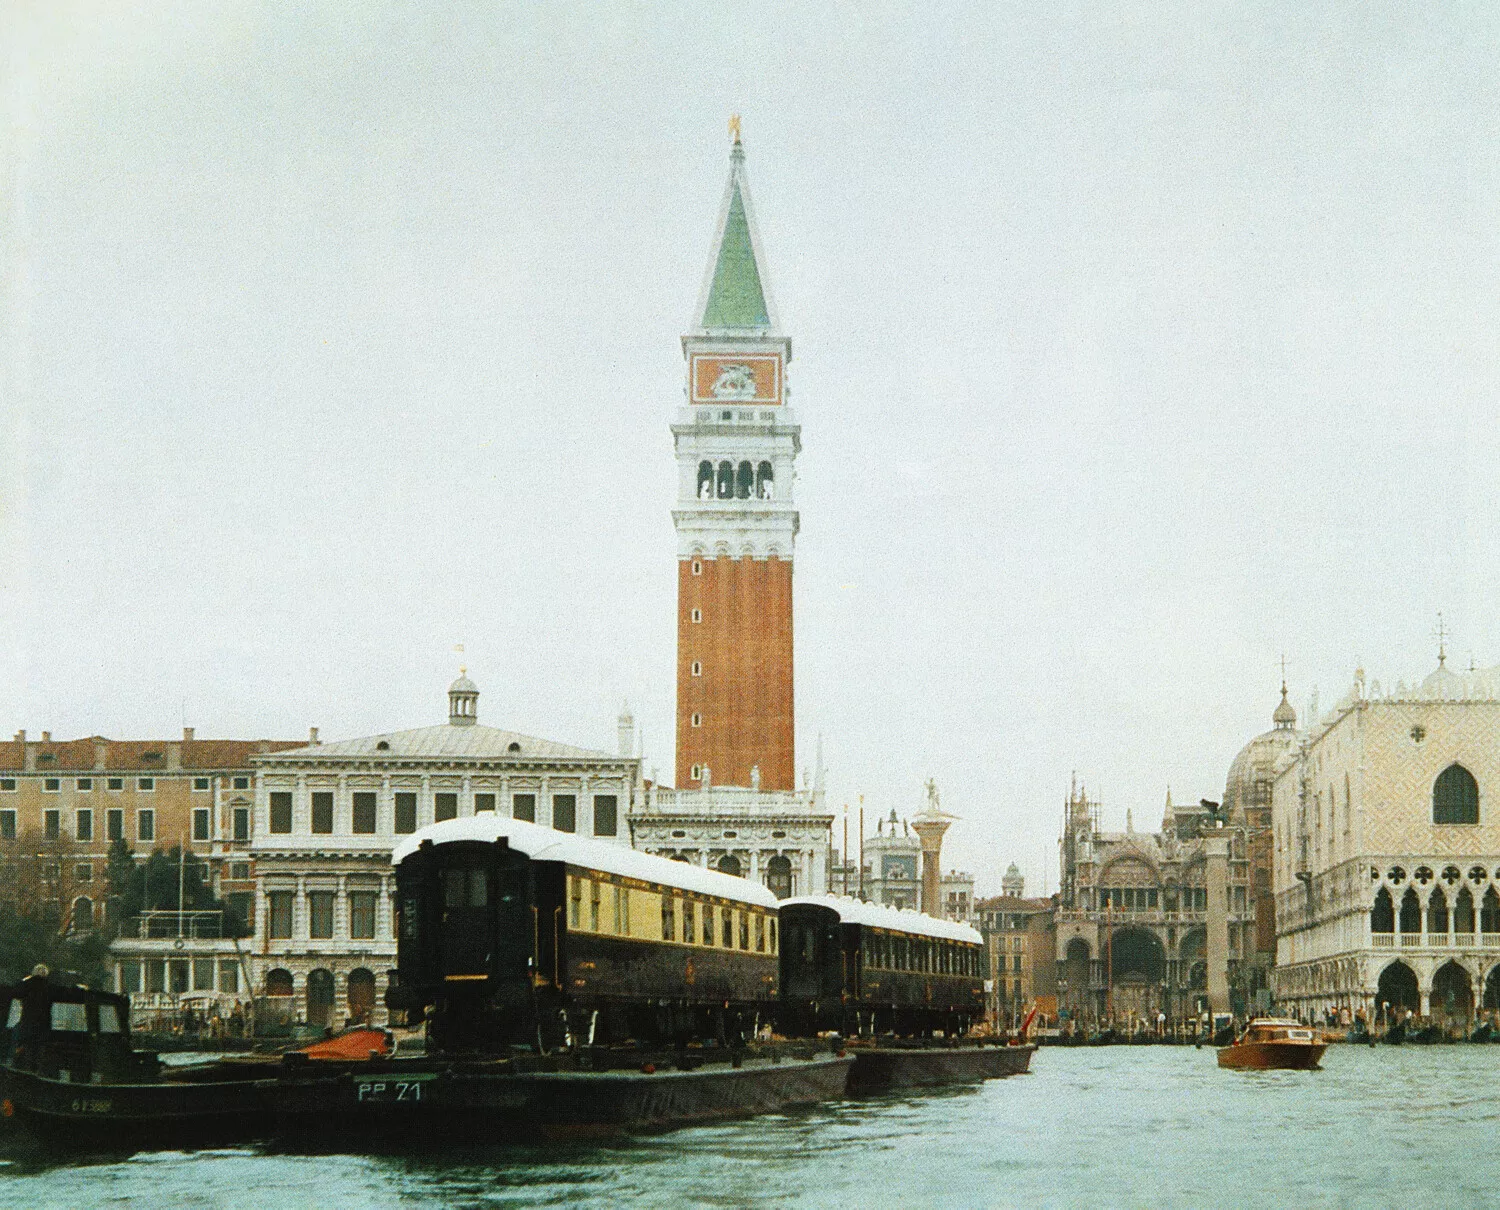 Shirley Sherwood, Venice Simplon-Orient-Express The World's Most Celebrated Train, Revised Fourth Edition